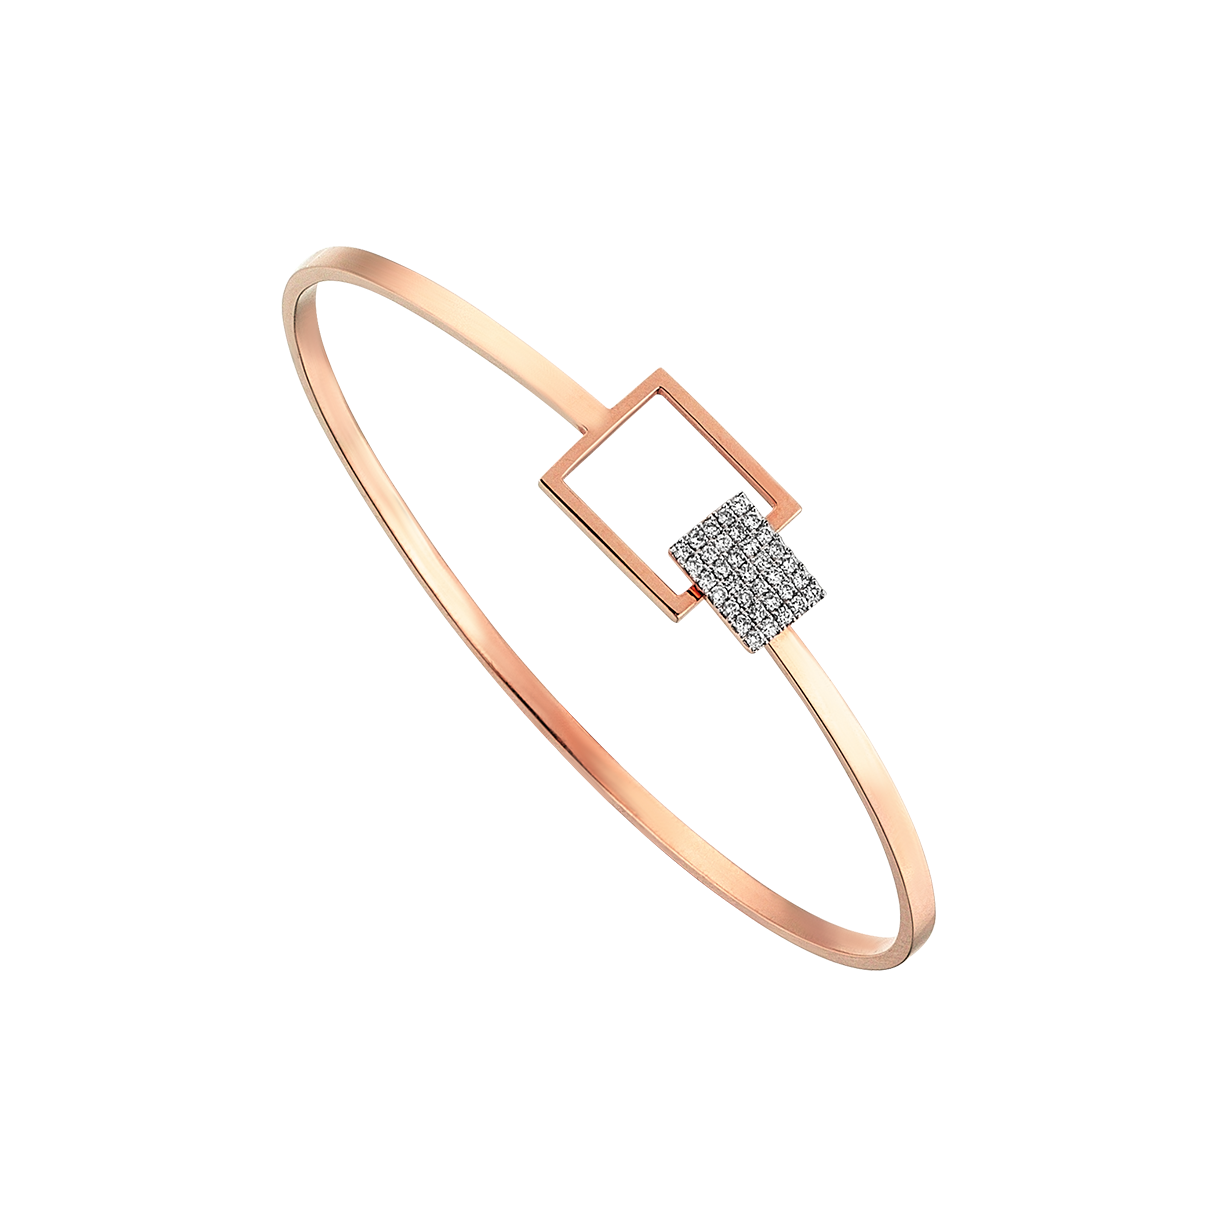 Geometric Squares Pave Bracelet in Rose Gold - Her Story Shop